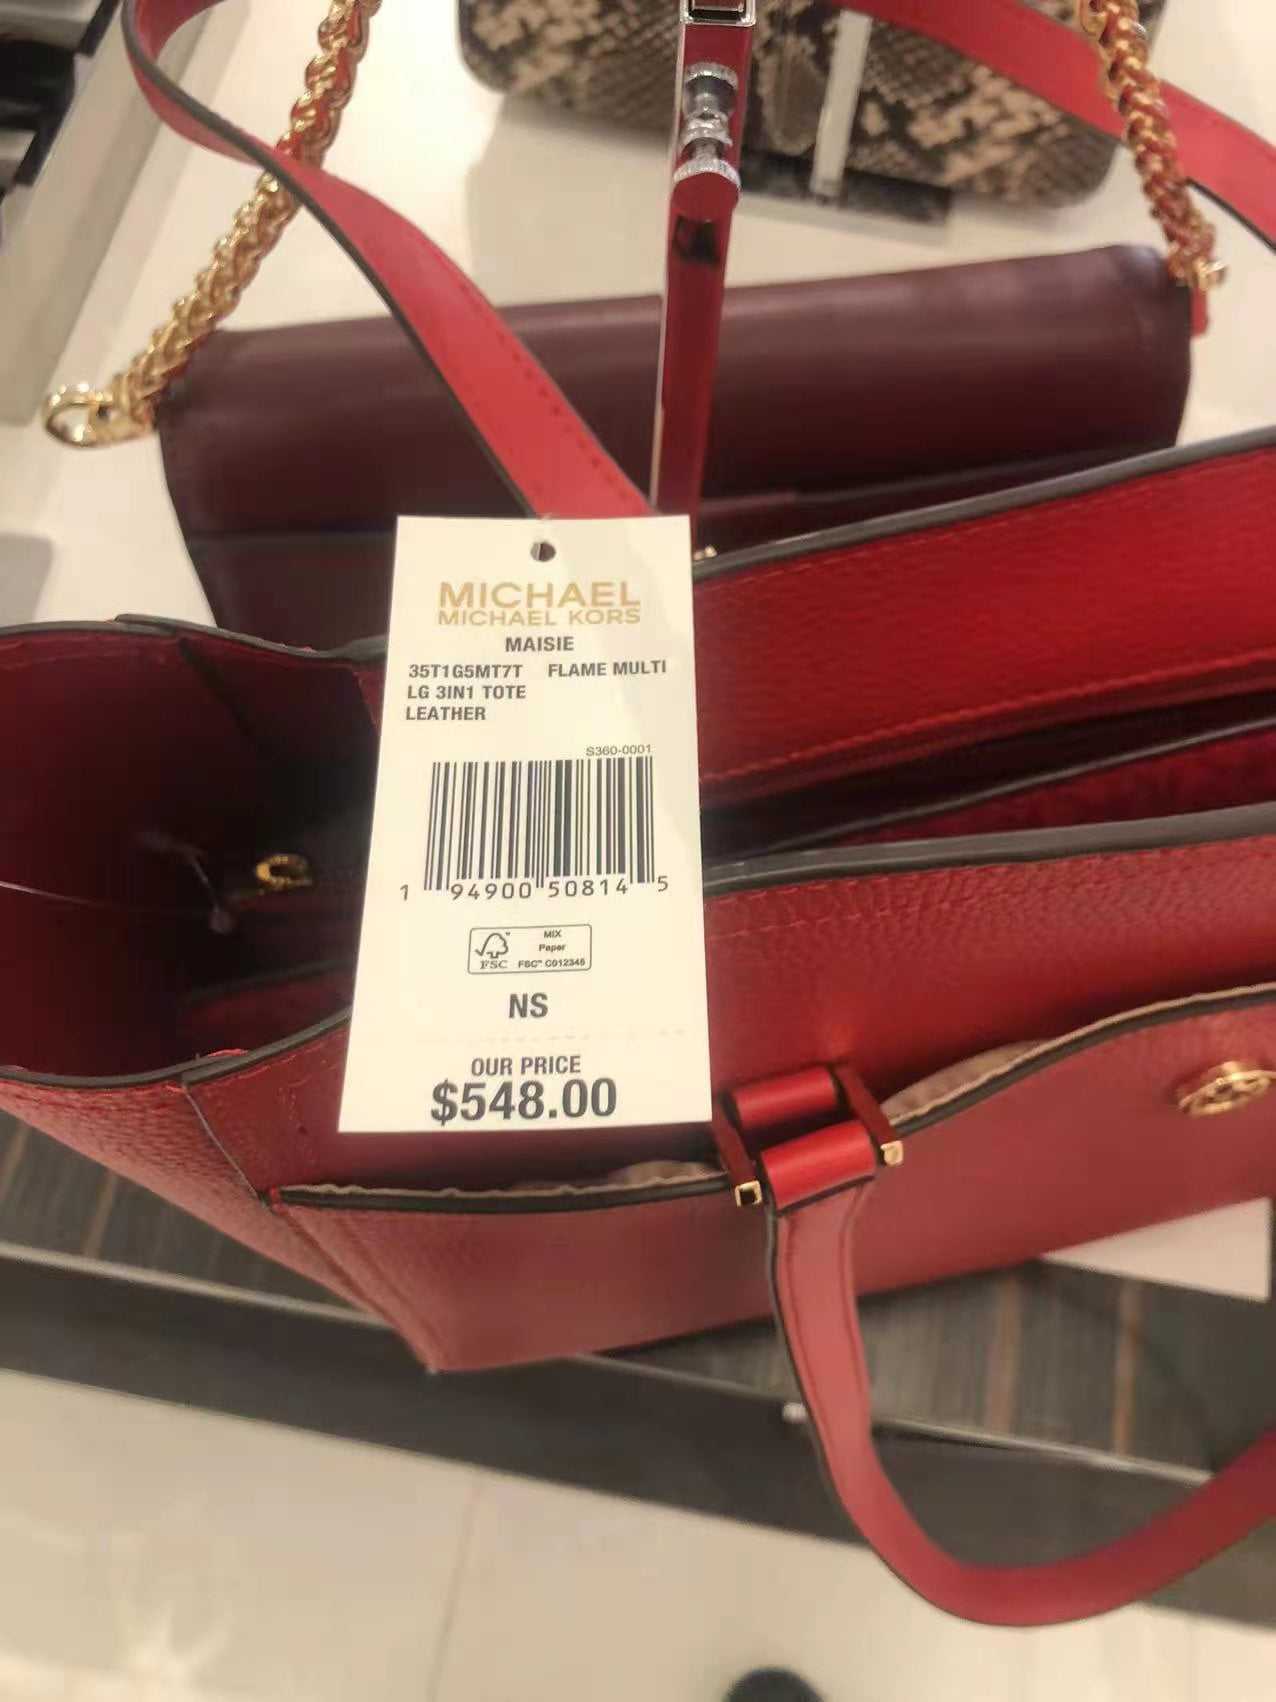 TK Maxx has a clearance sale with Michael Kors and DKNY bags